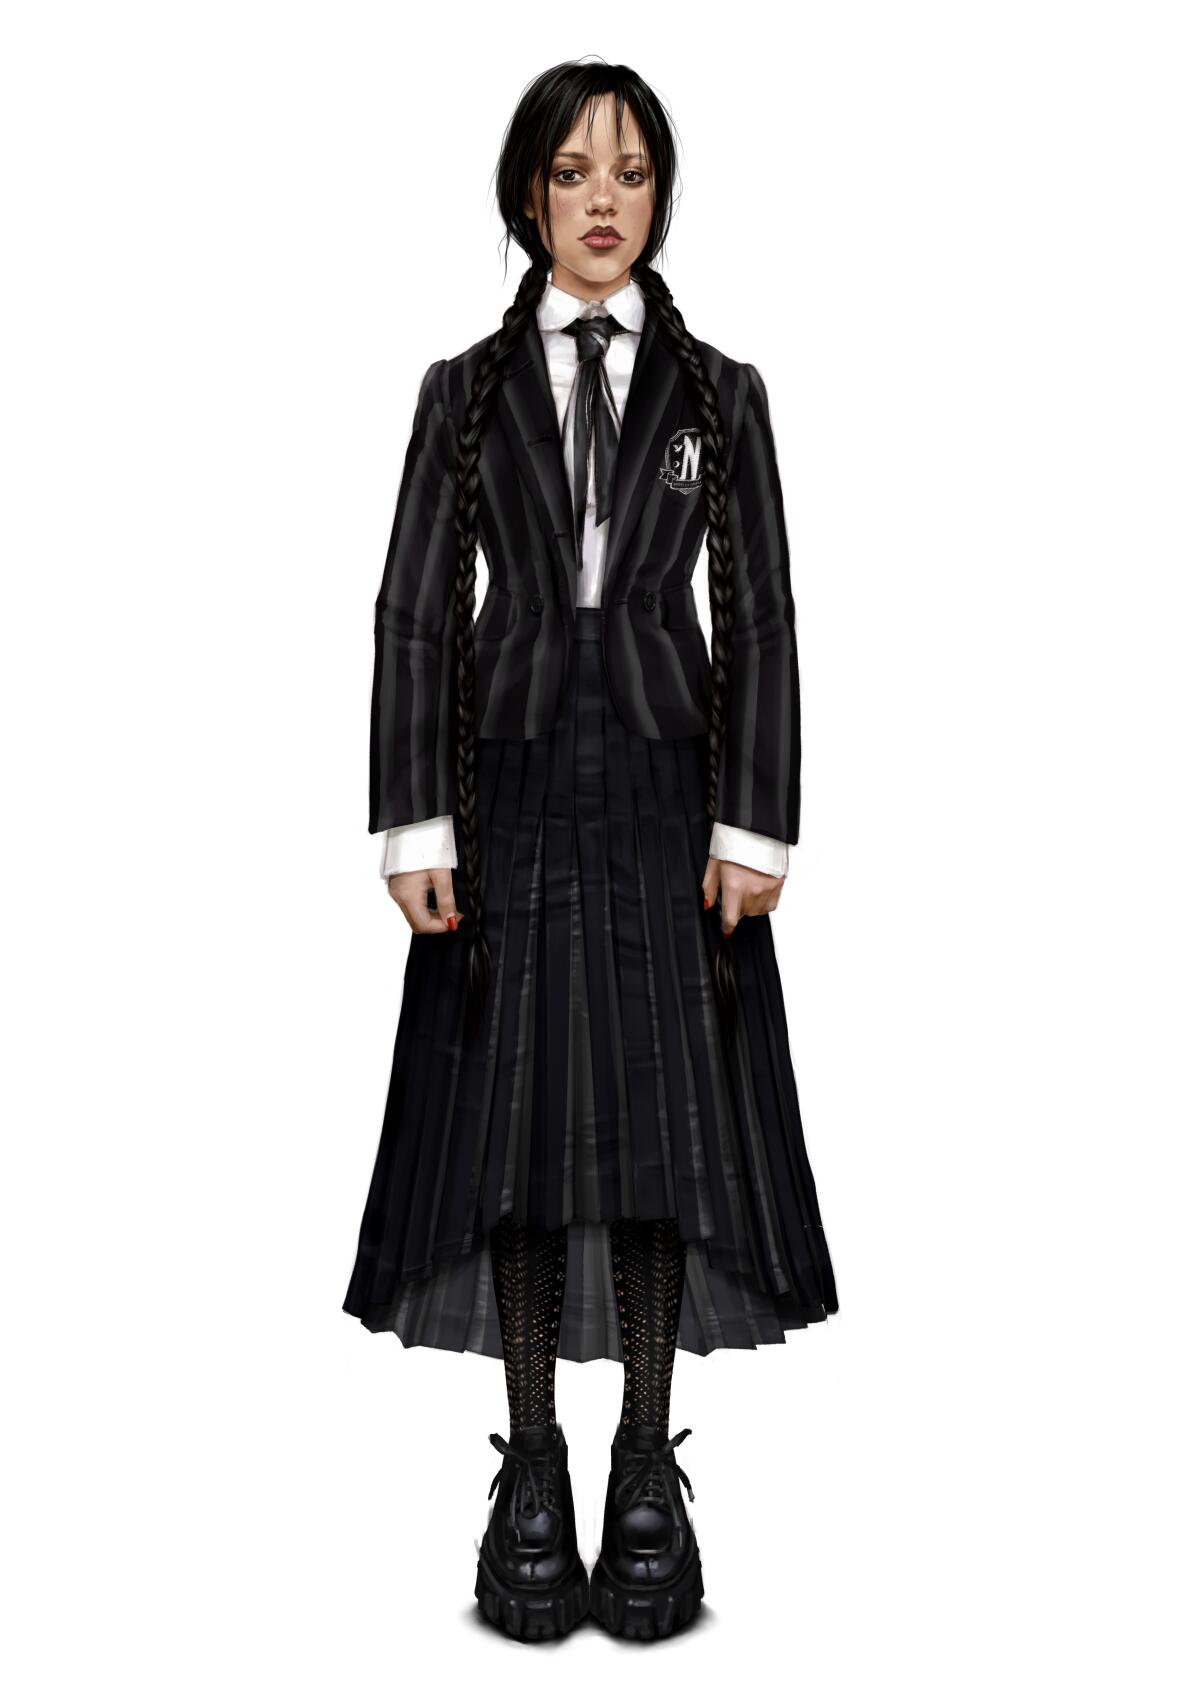 An illustration of Wednesday's school uniform of pleated skirt, blazer and tie. 